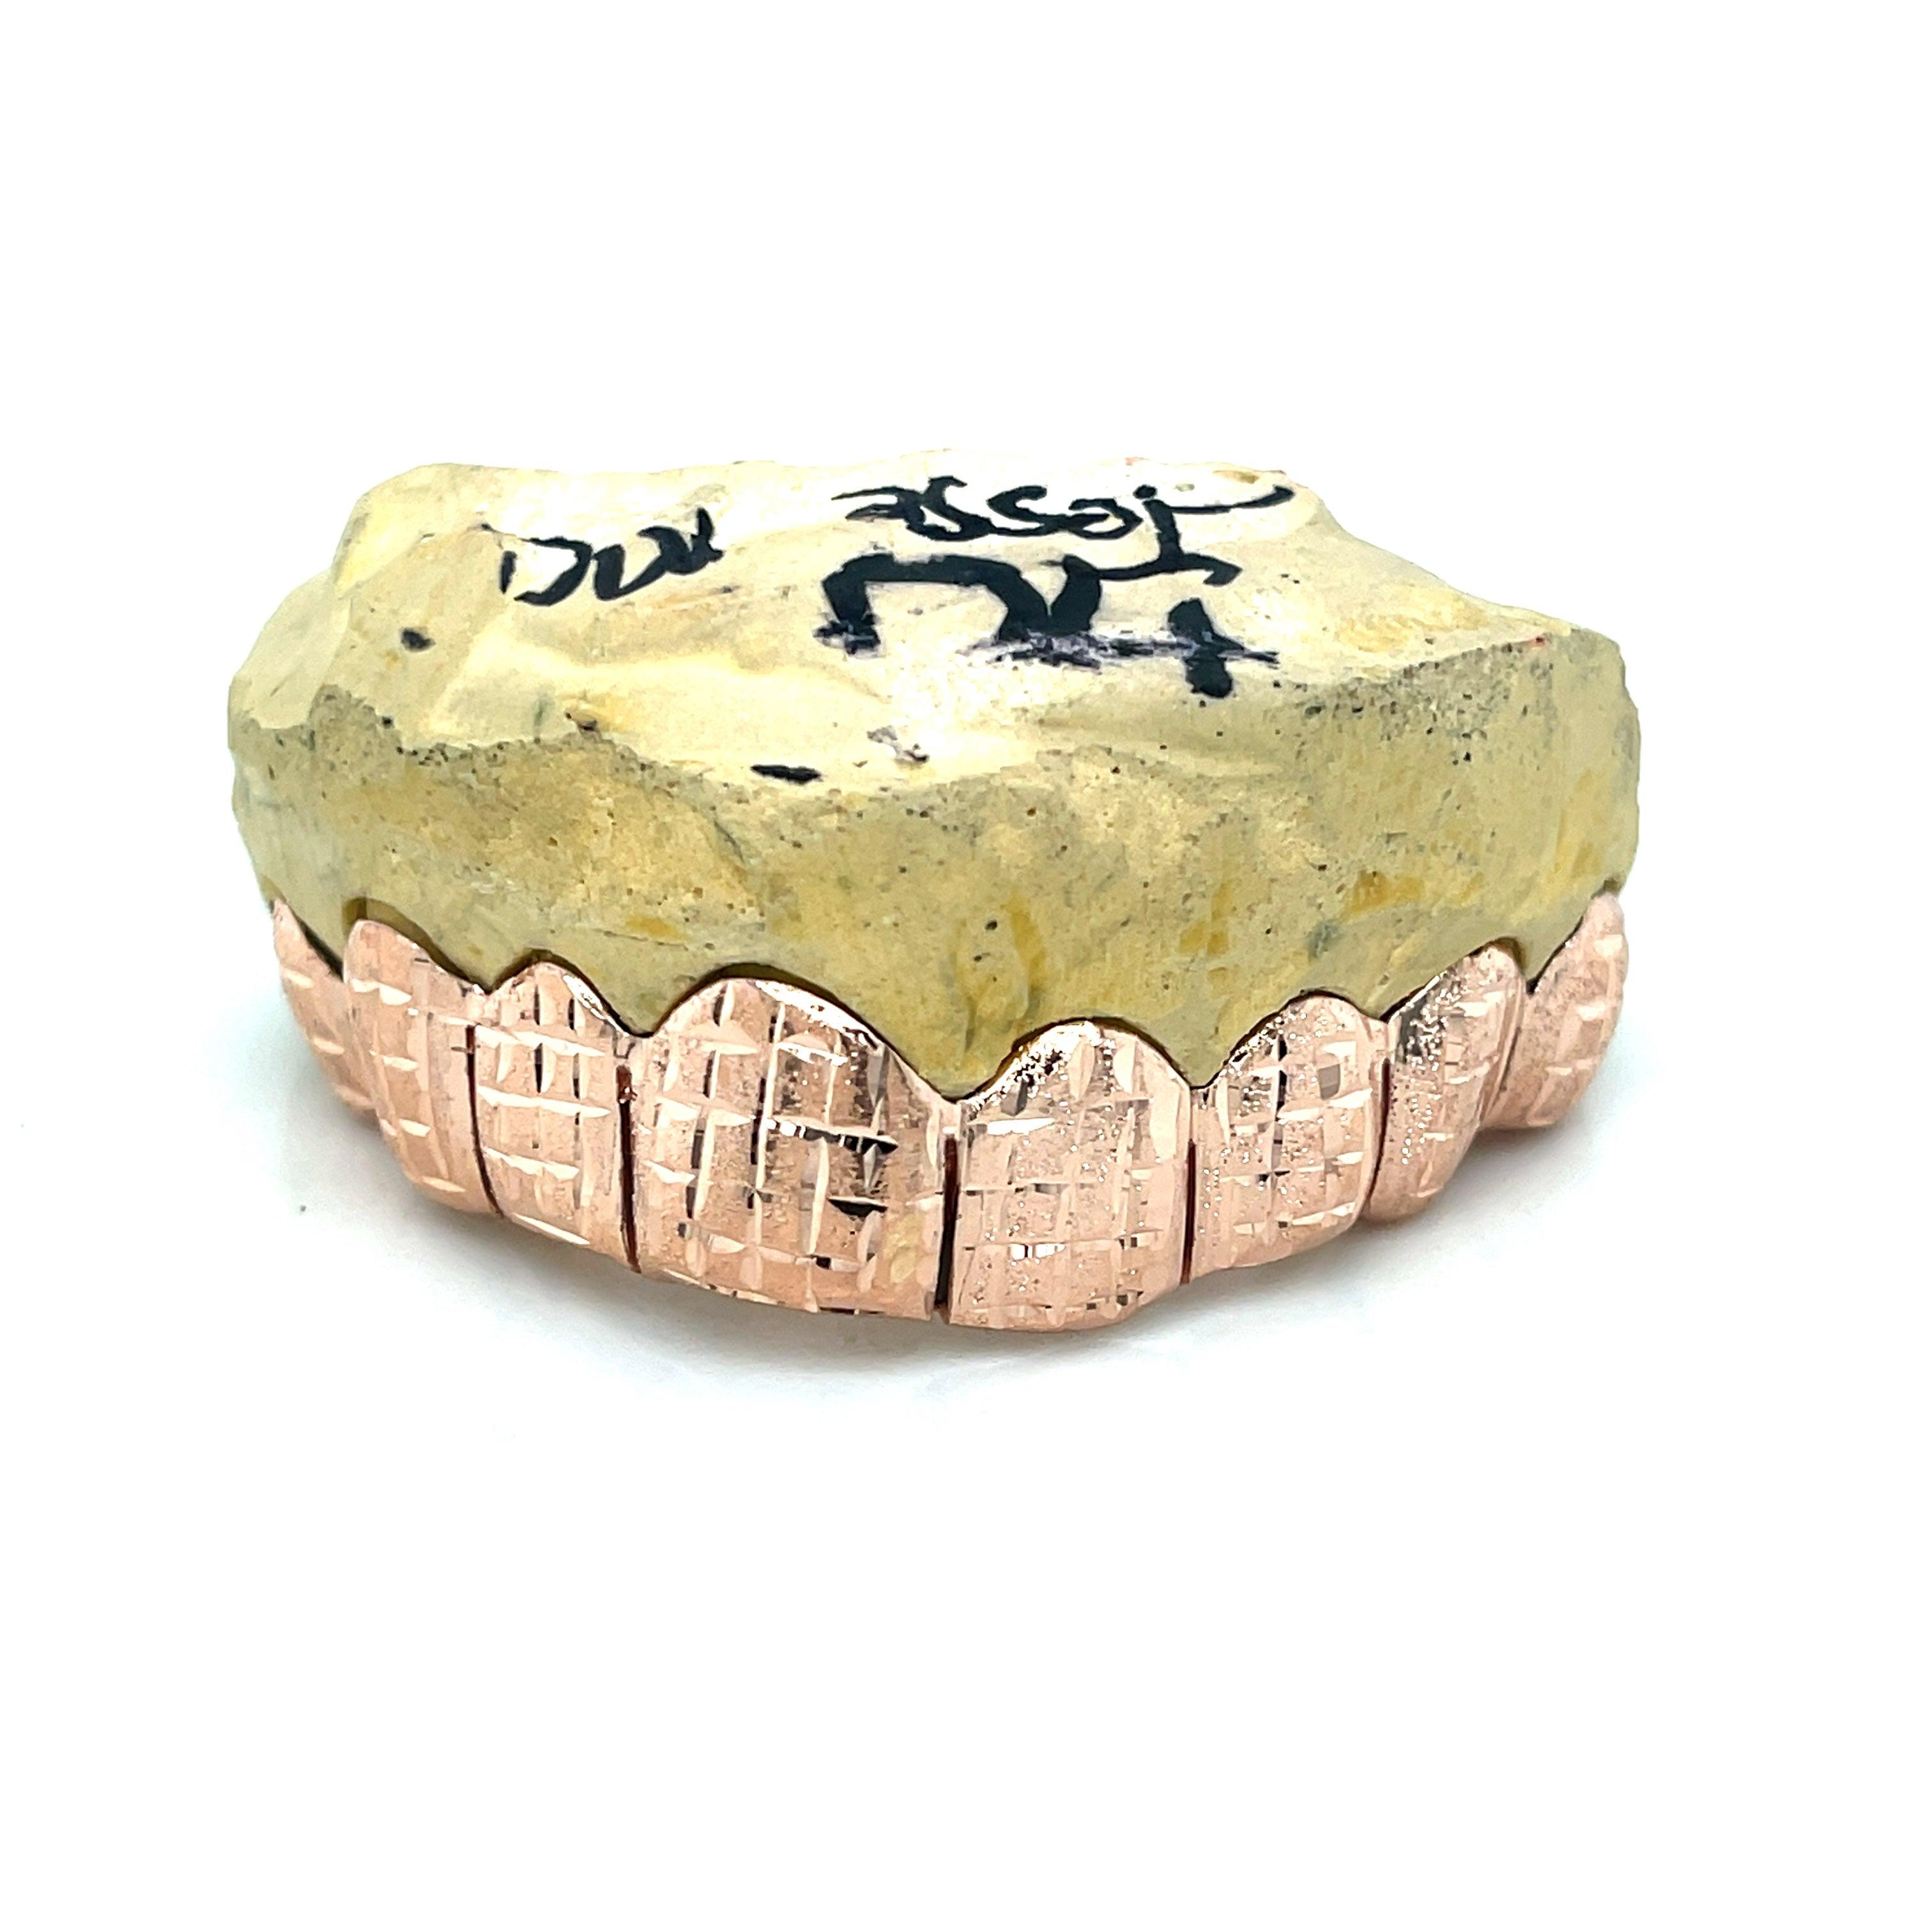 8pc Rose Gold Dusted Bricks Top Grillz - Seattle Gold Grillz